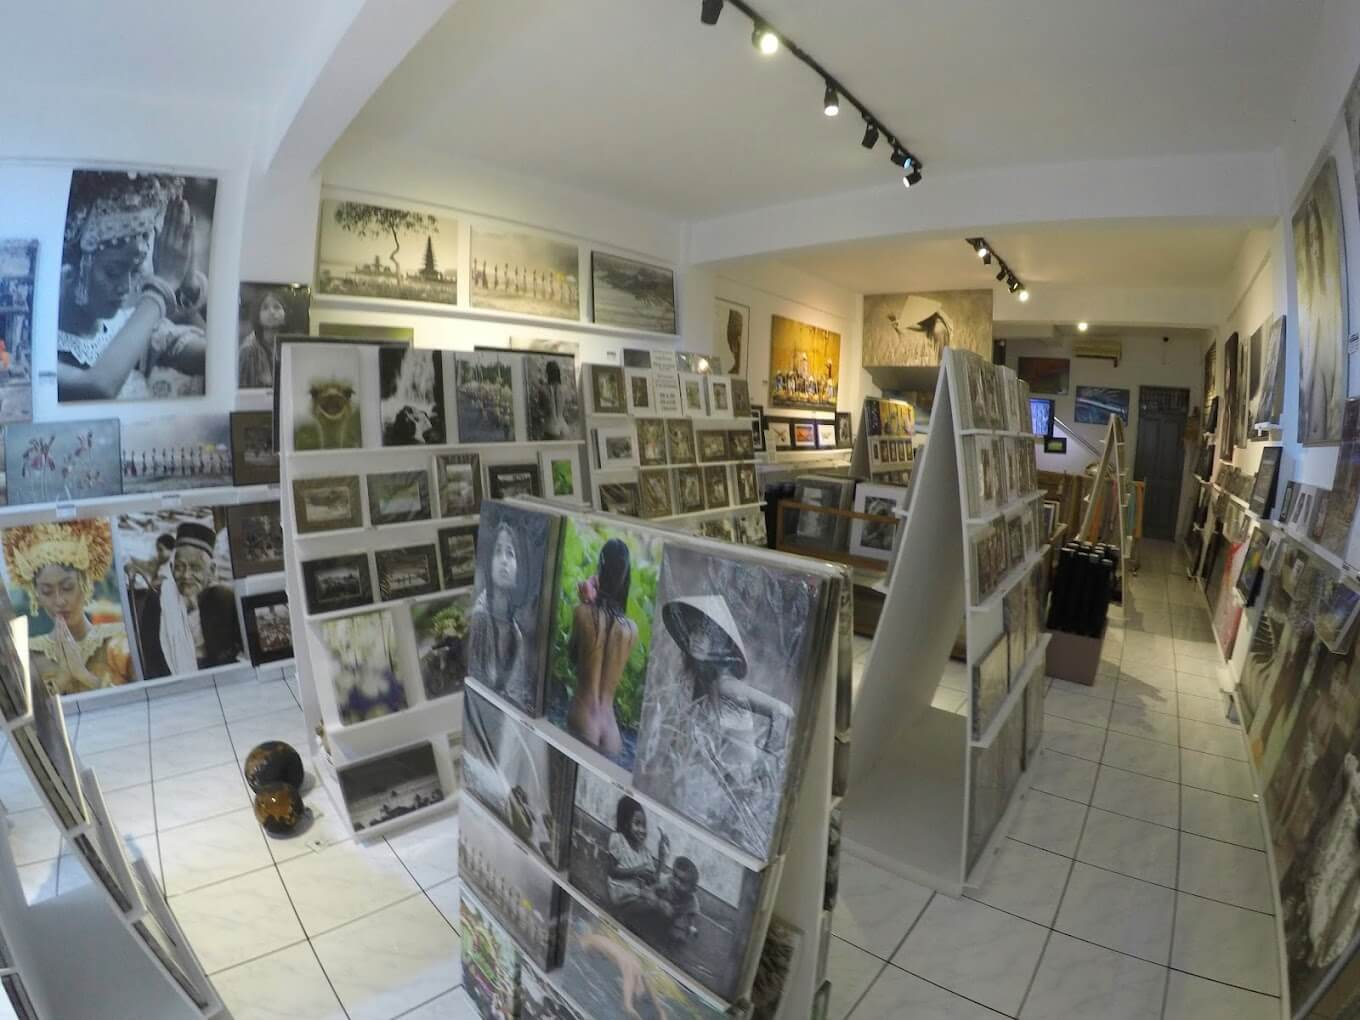 A featured photography exhibit on display at Nacivet Art Gallery.